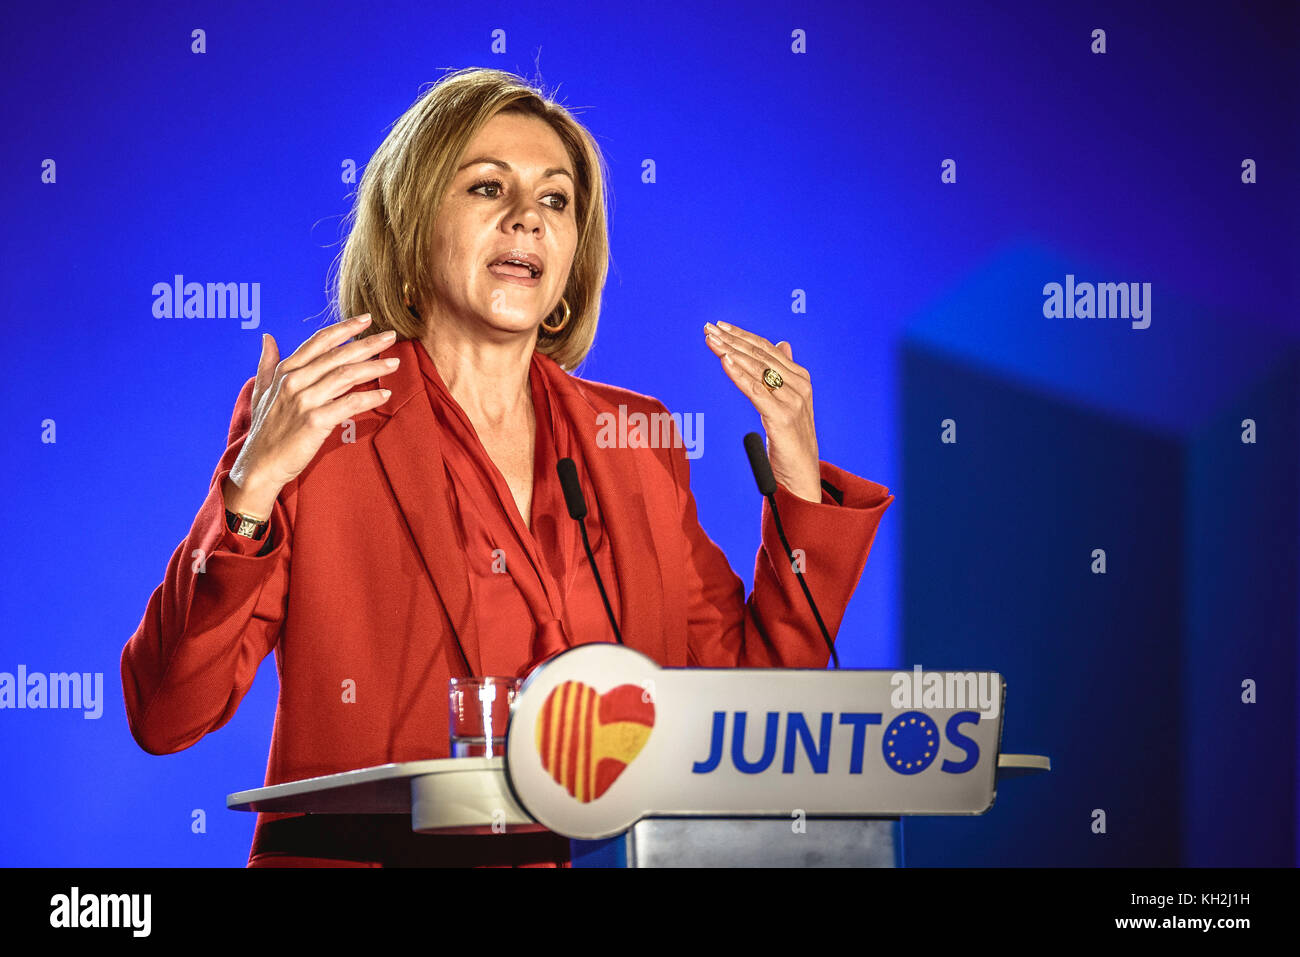 Barcelona, Spain. 12 November, 2017:  MARIA DOLORES COSPEDAL, General Secretary of the PP (People's Party), addresses the audience during the presentation of the party's candidates for the Catalan elections on December 21st Credit: Matthias Oesterle/Alamy Live News Stock Photo